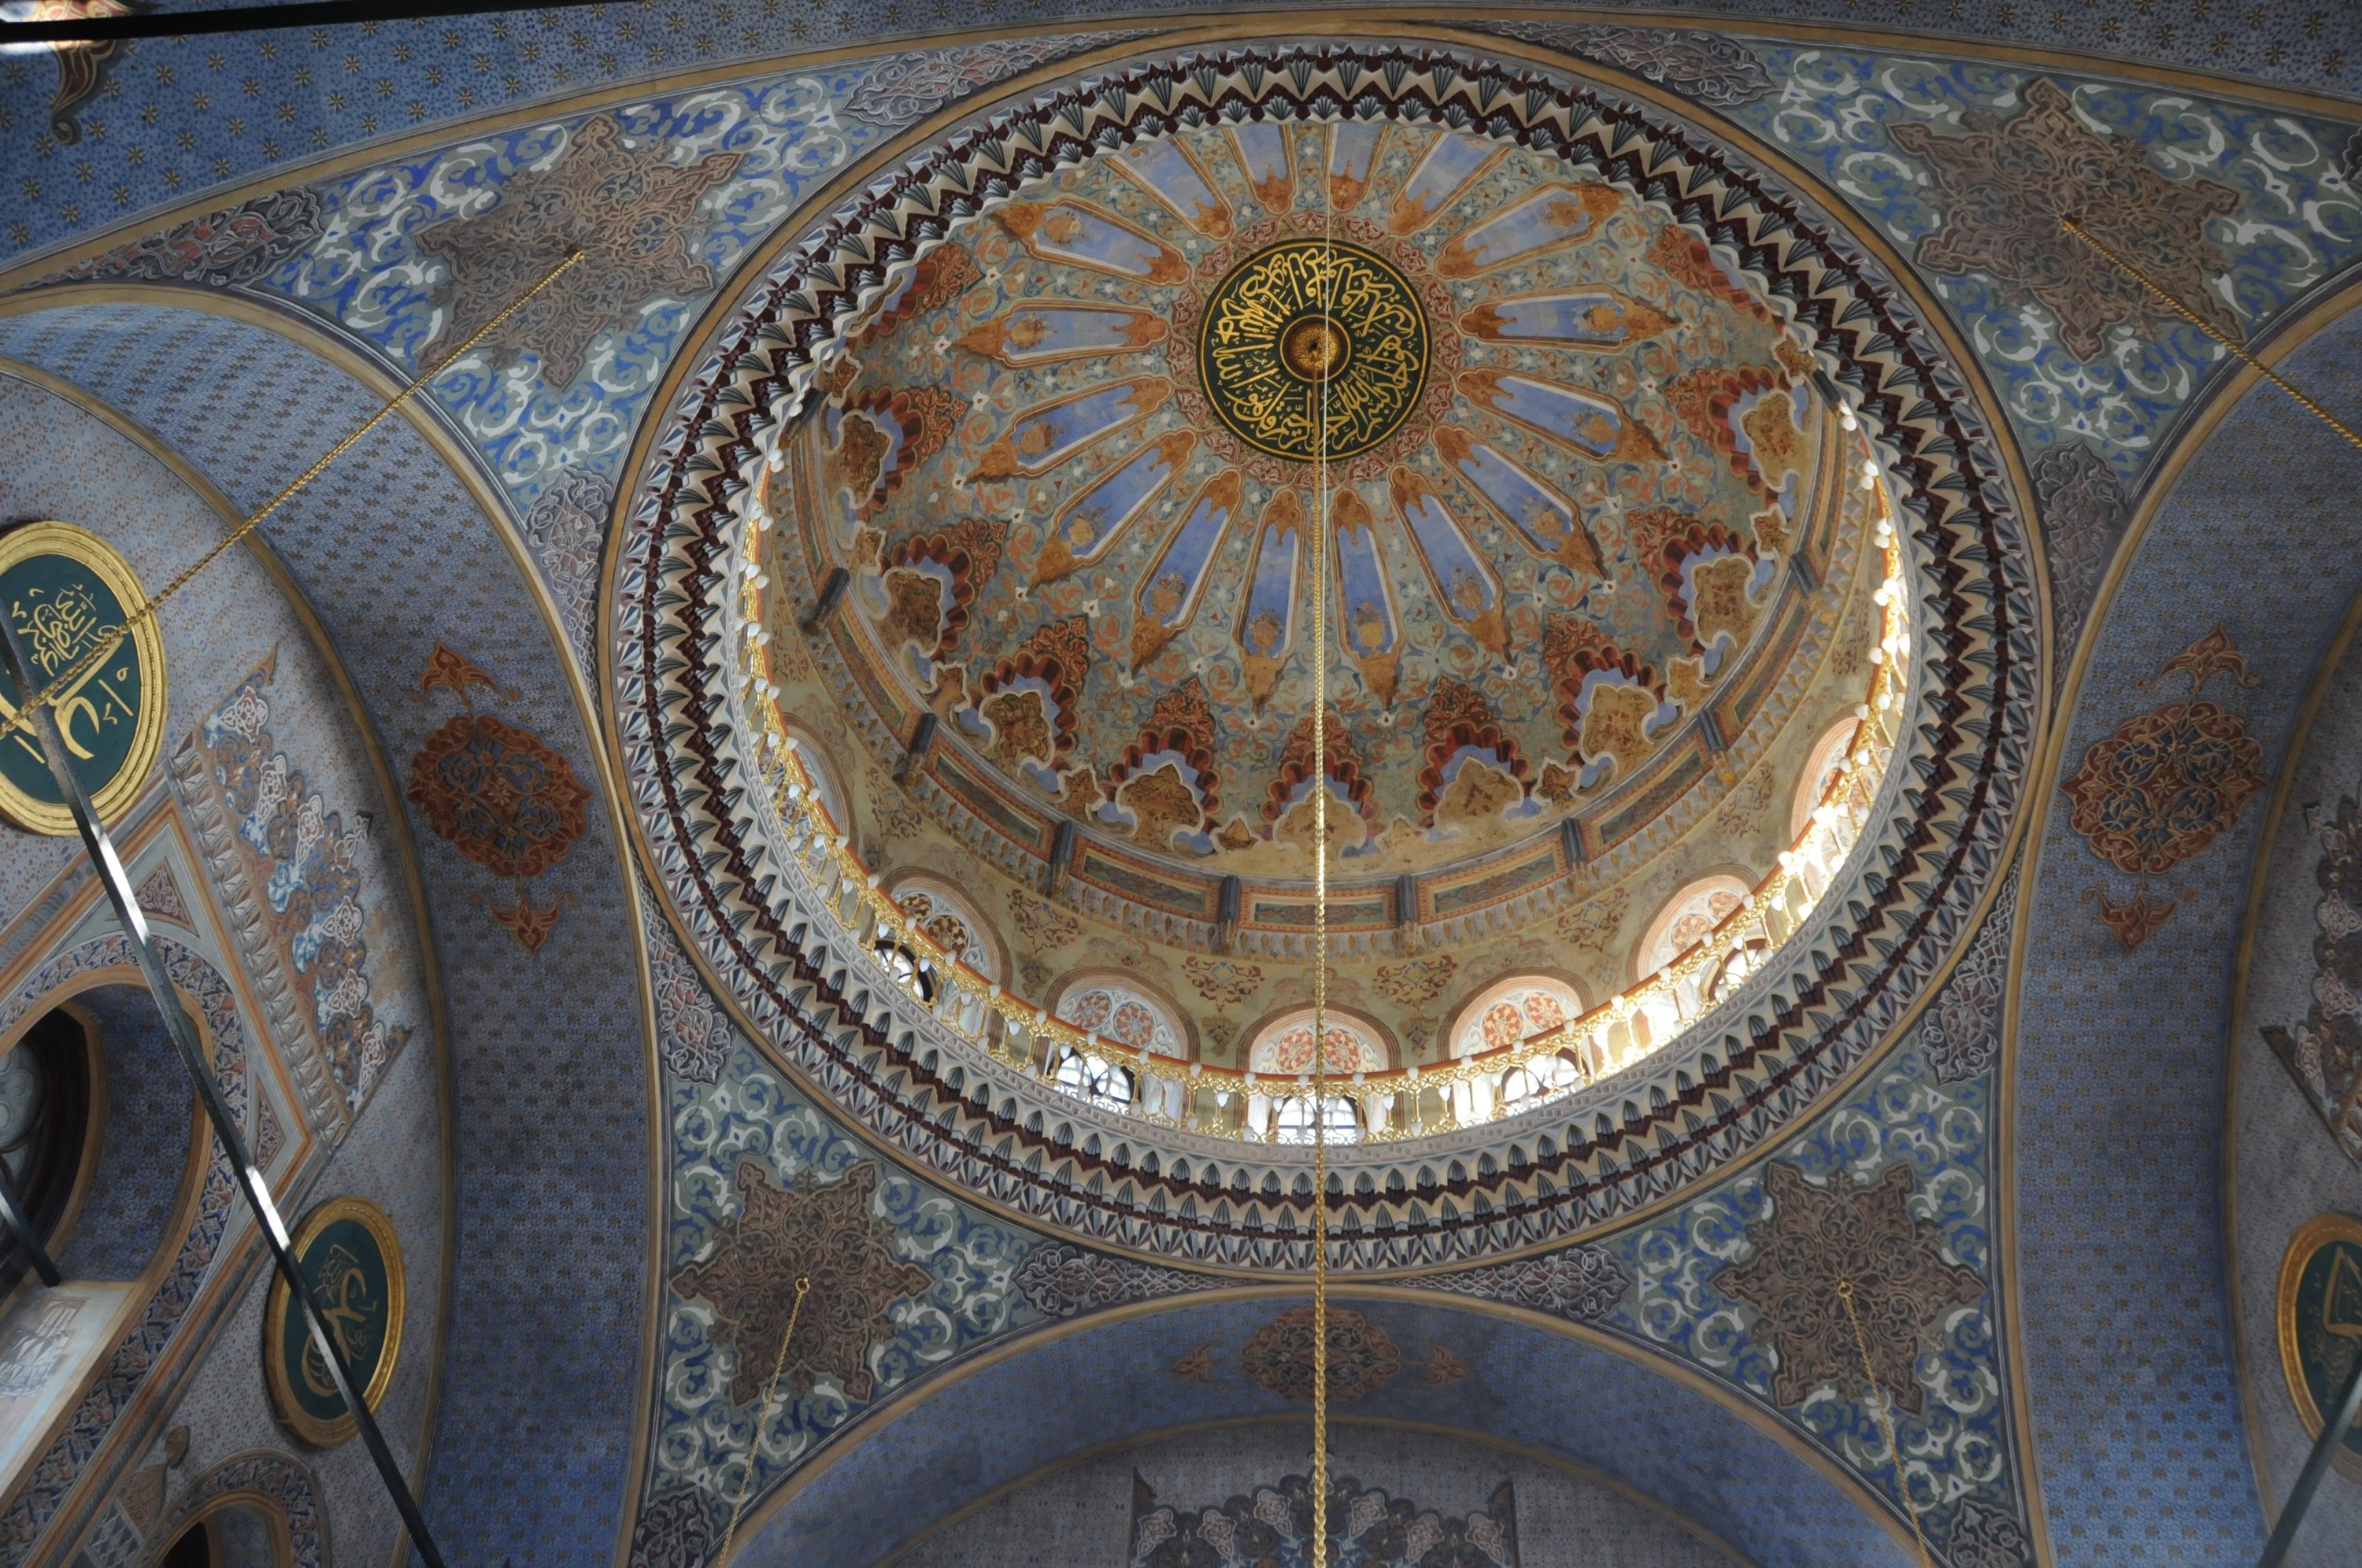 An interior view of the Pertevniyal Valide Sultan Mosque, Aksaray, Istanbul, March 9, 2011. (Photo by Hasan Ay)